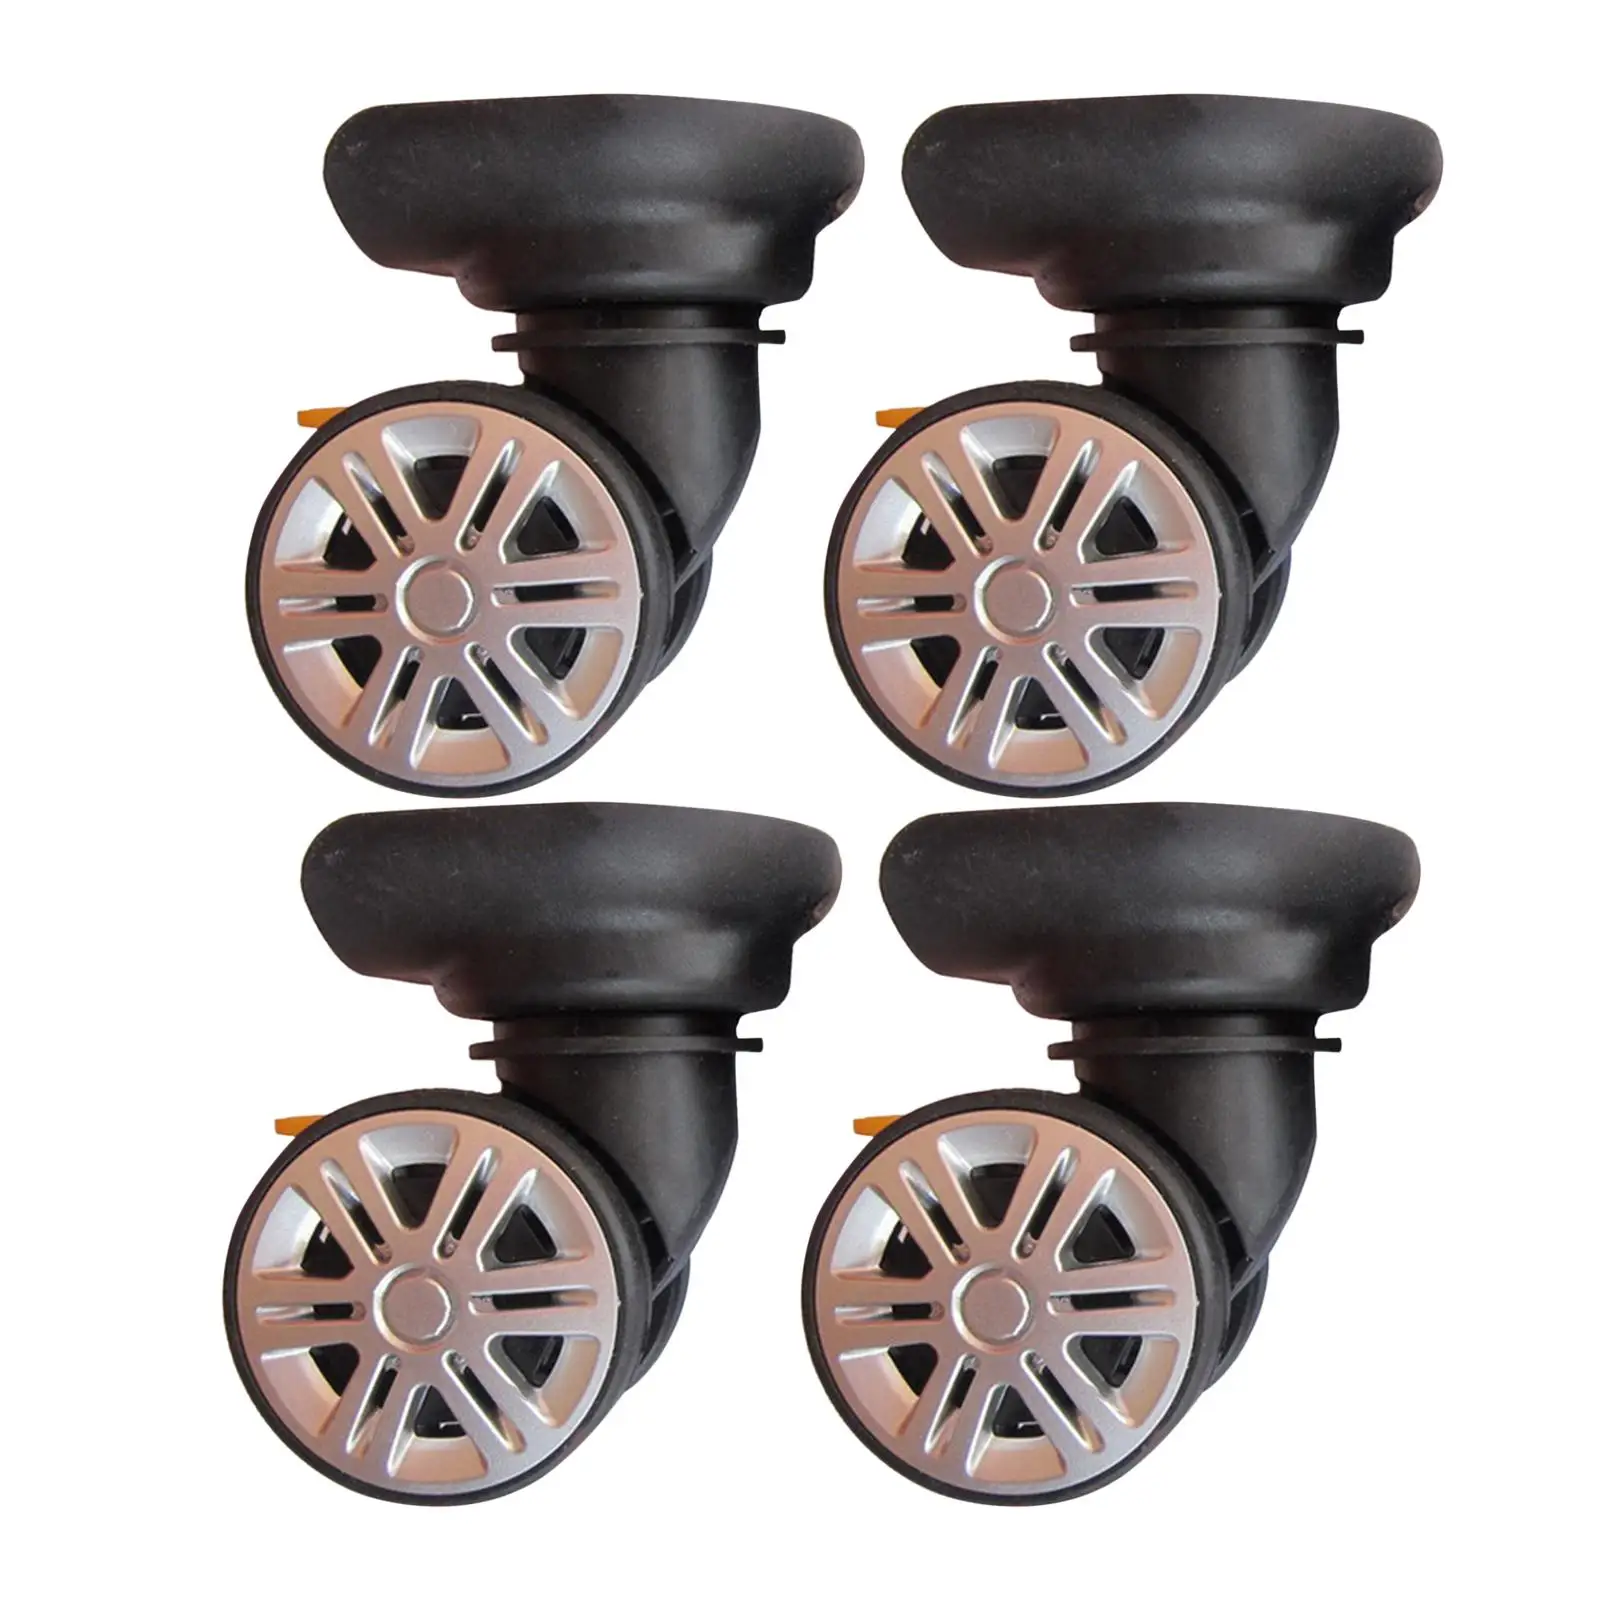 4x Luggage Suitcase Wheels Trolley Replacement Wheels for Trolley Suitcases